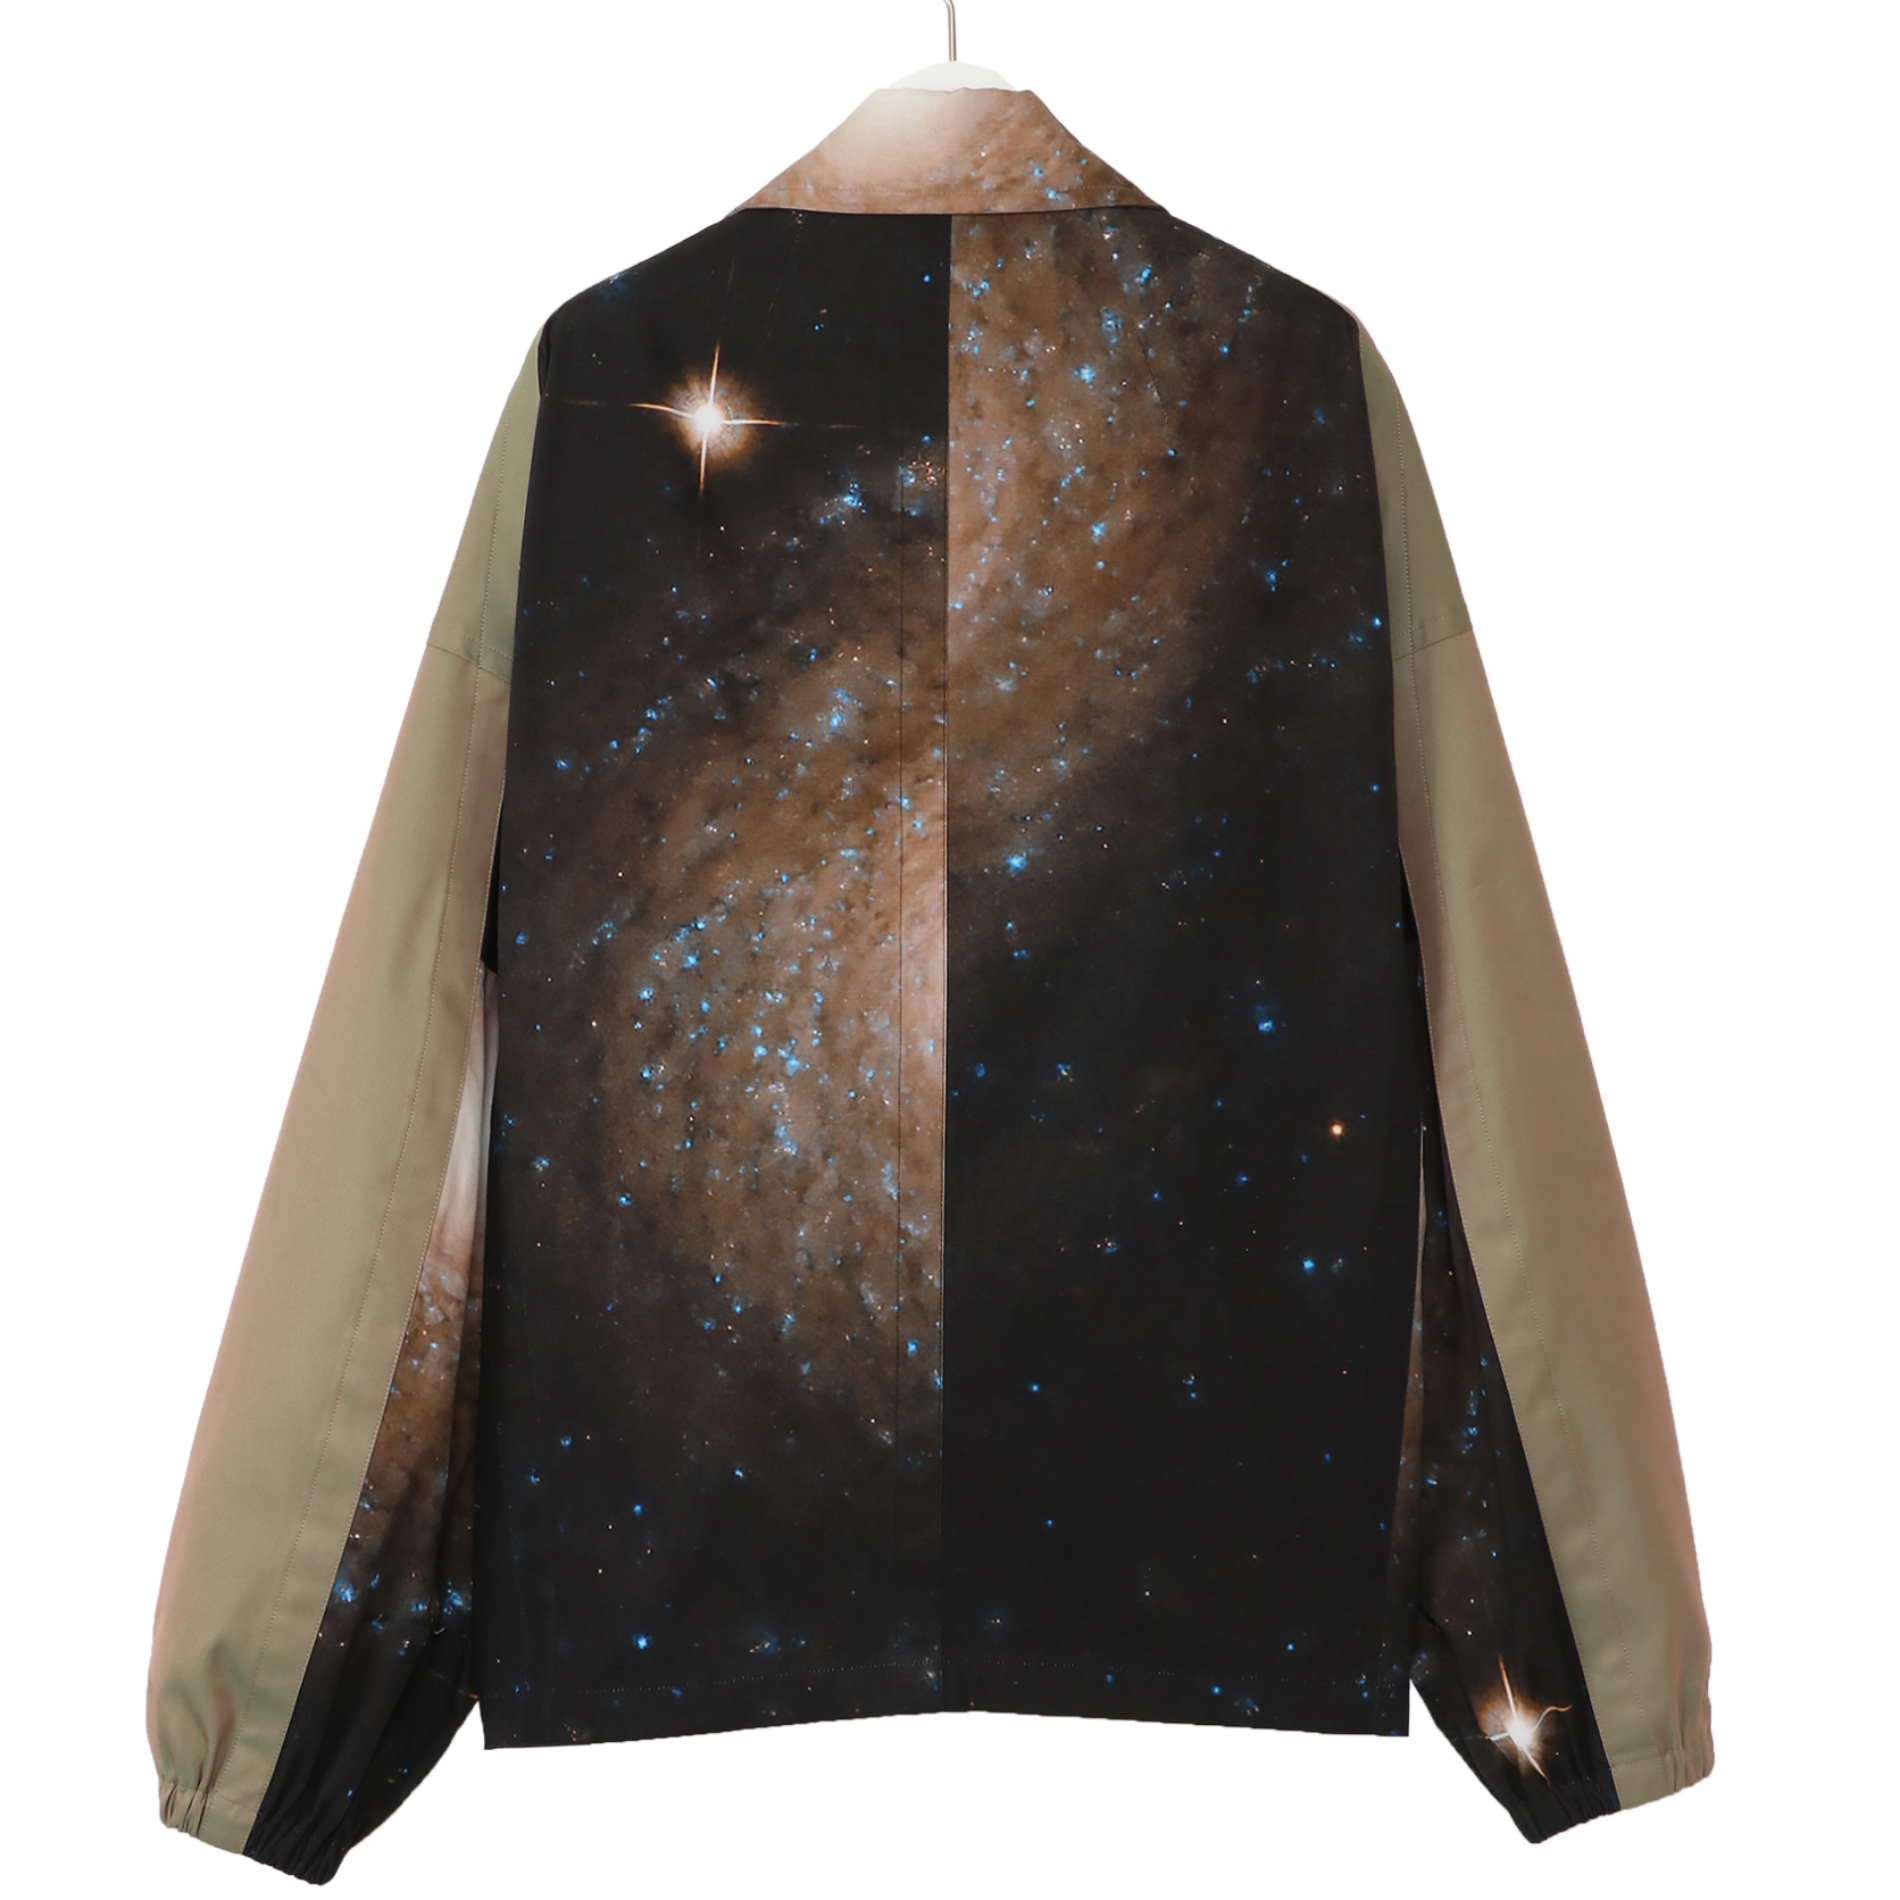 NEON SIGN COSMO BARRED SPACE JACKET OLIVE/BLACK